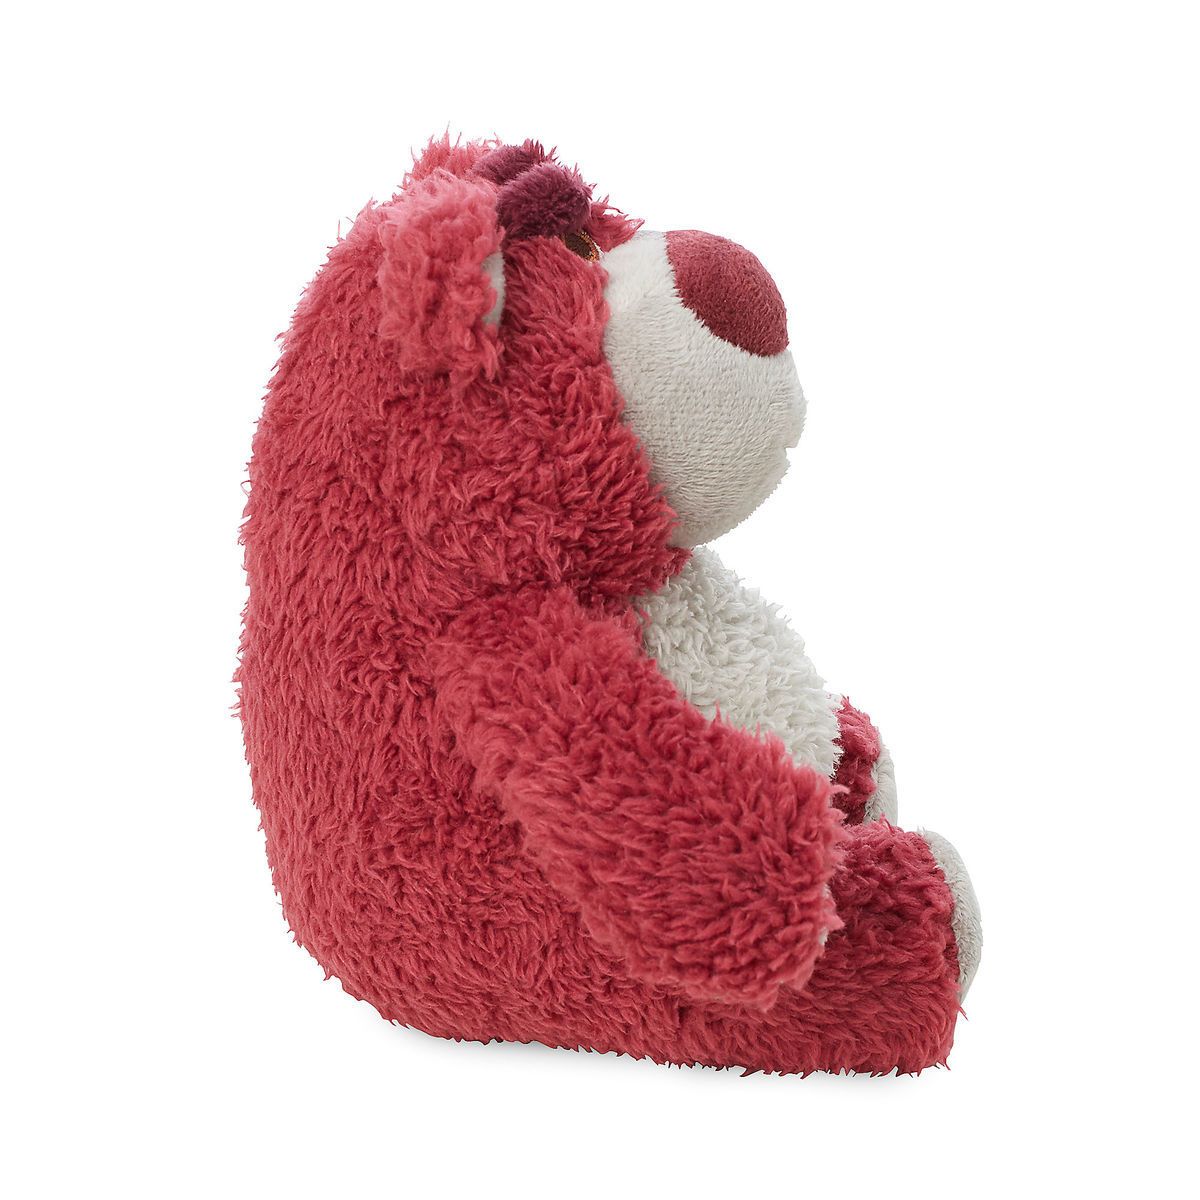 Toy Story 3 Lotso Plush [Strawberry Scented] - image 2 of 3